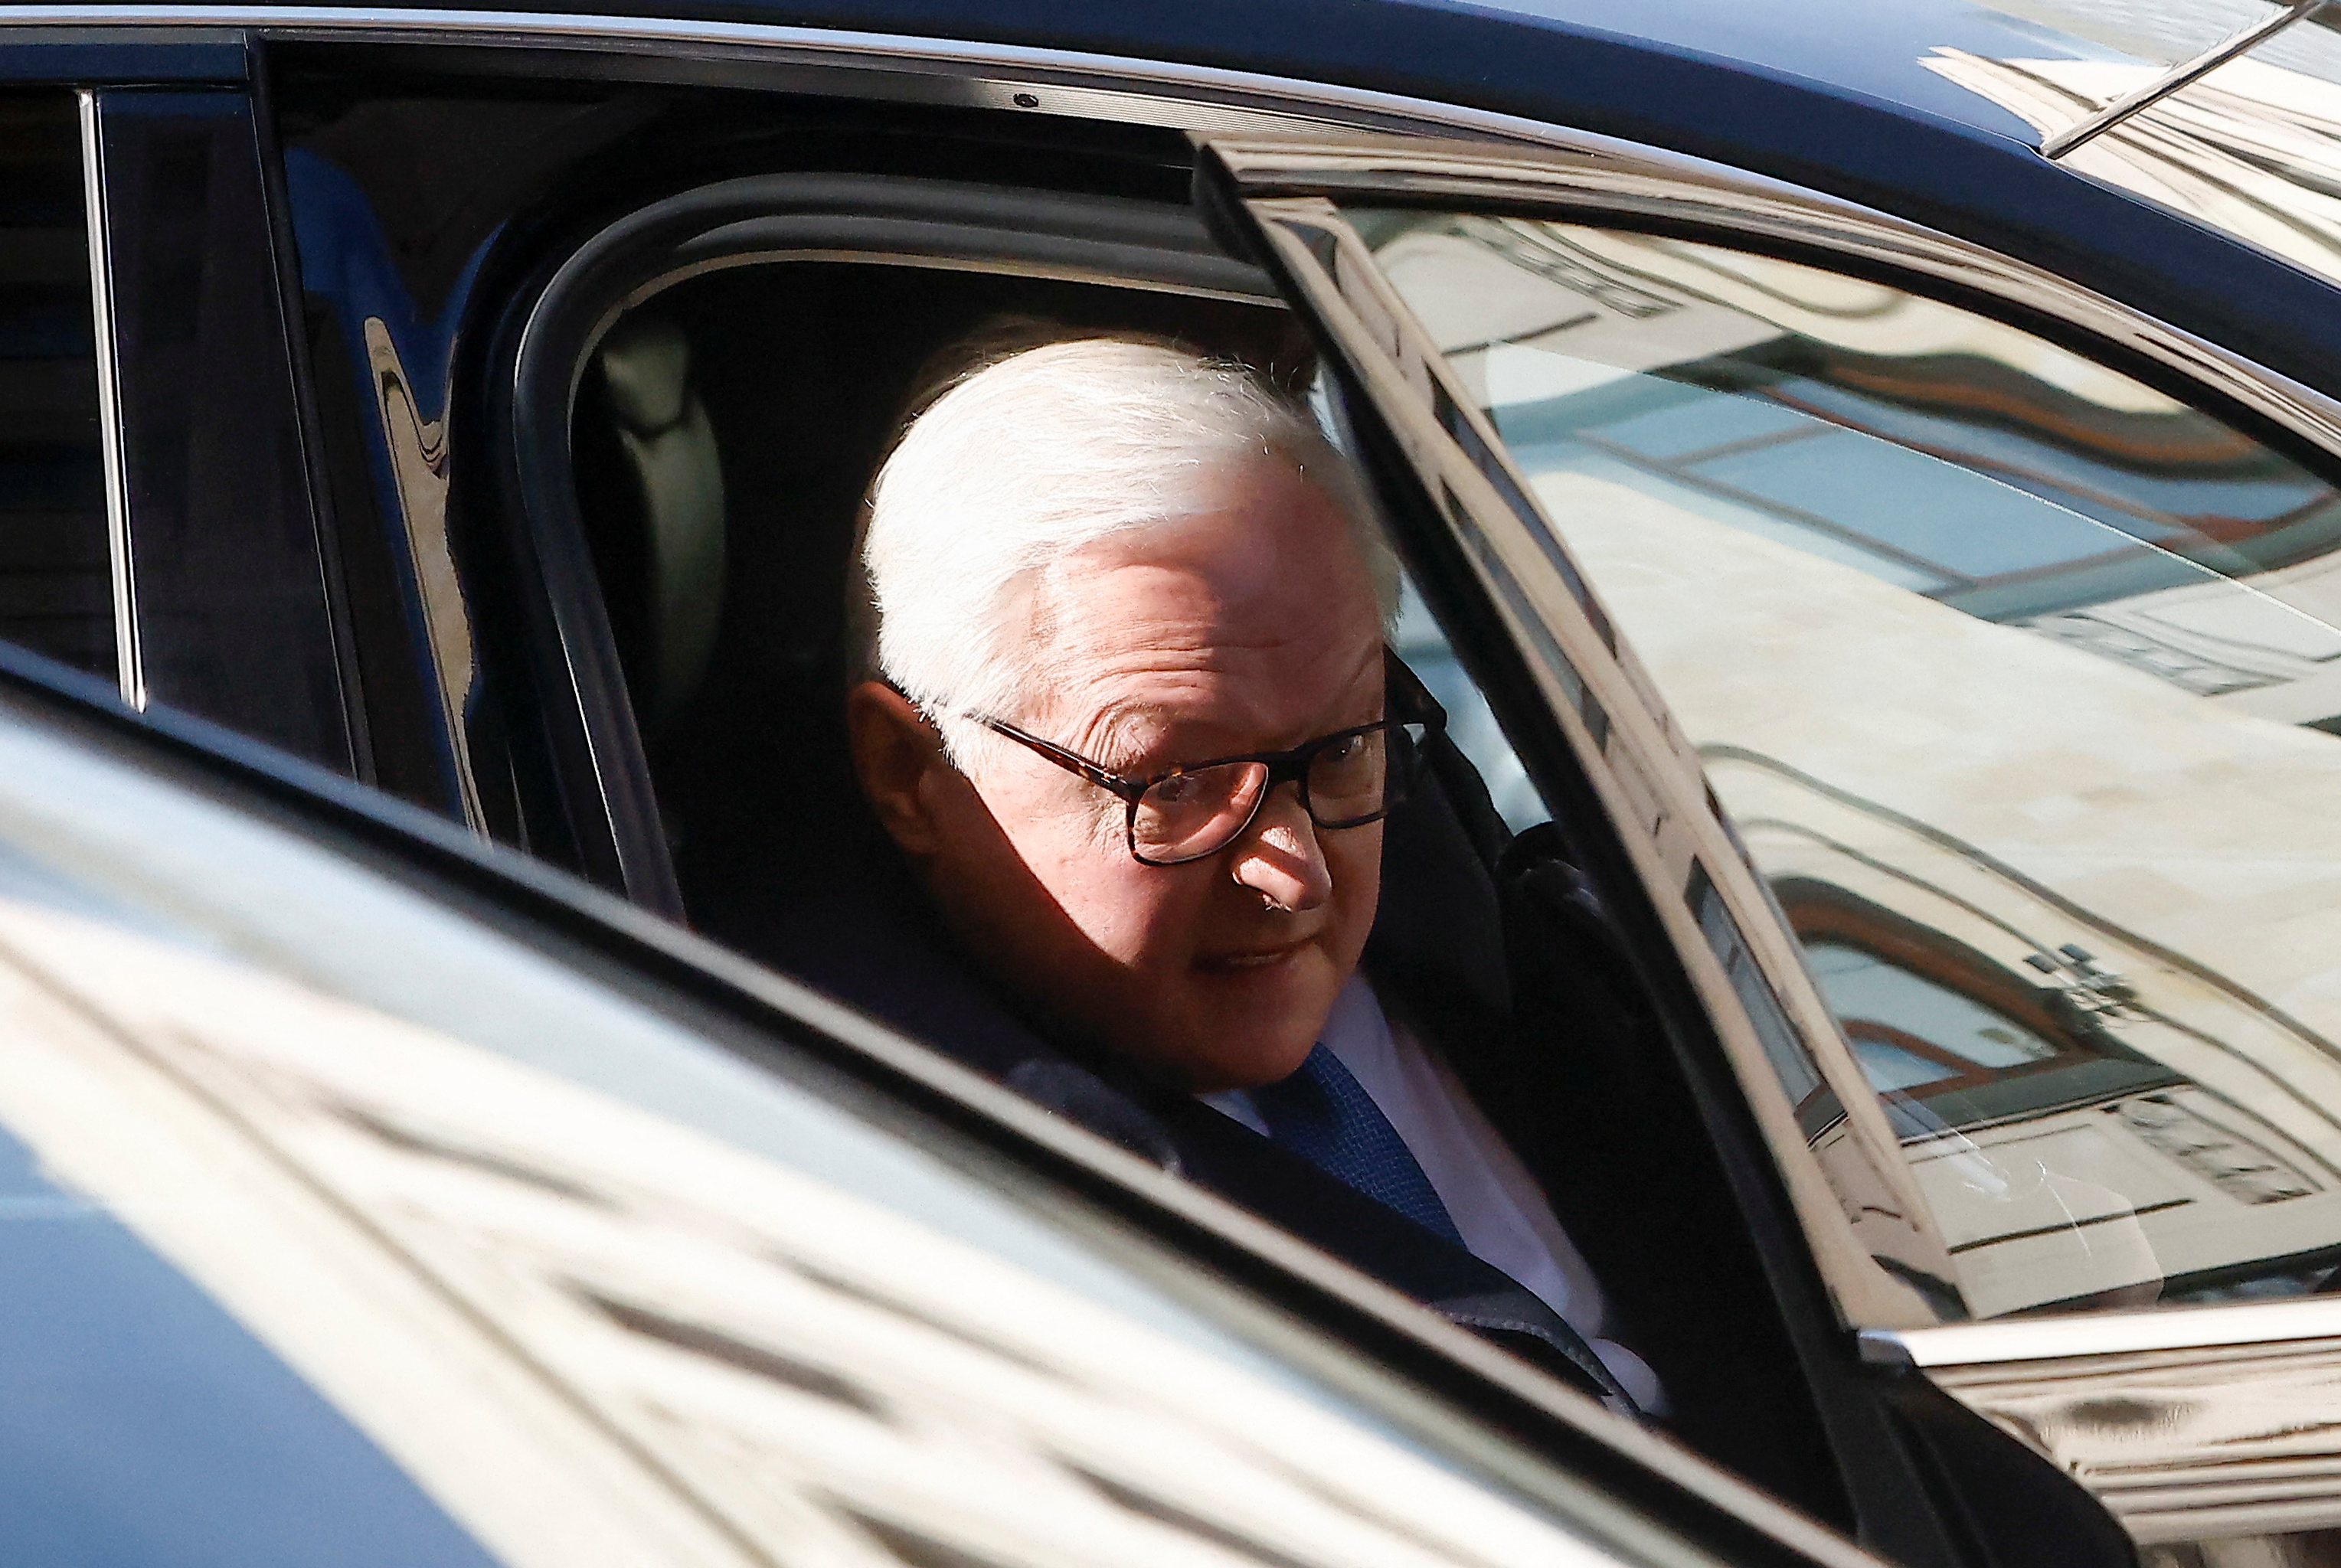 Russia's Deputy Foreign Minister Ryabkov leaves after talks with U.S. Under Secretary of State Nuland in Moscow